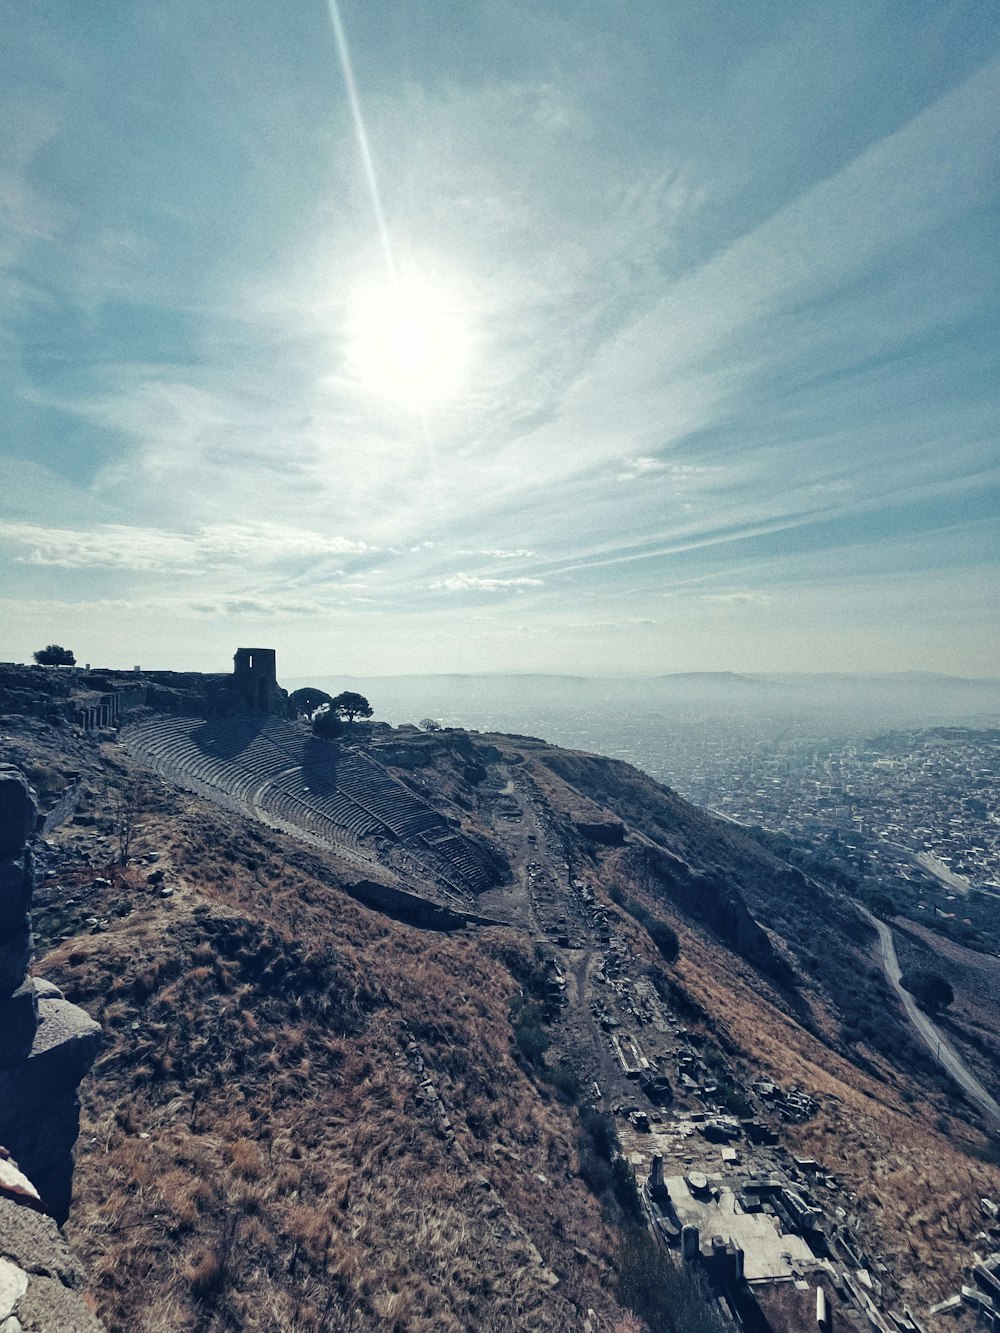 a person sitting on top of a hill overlooking a city